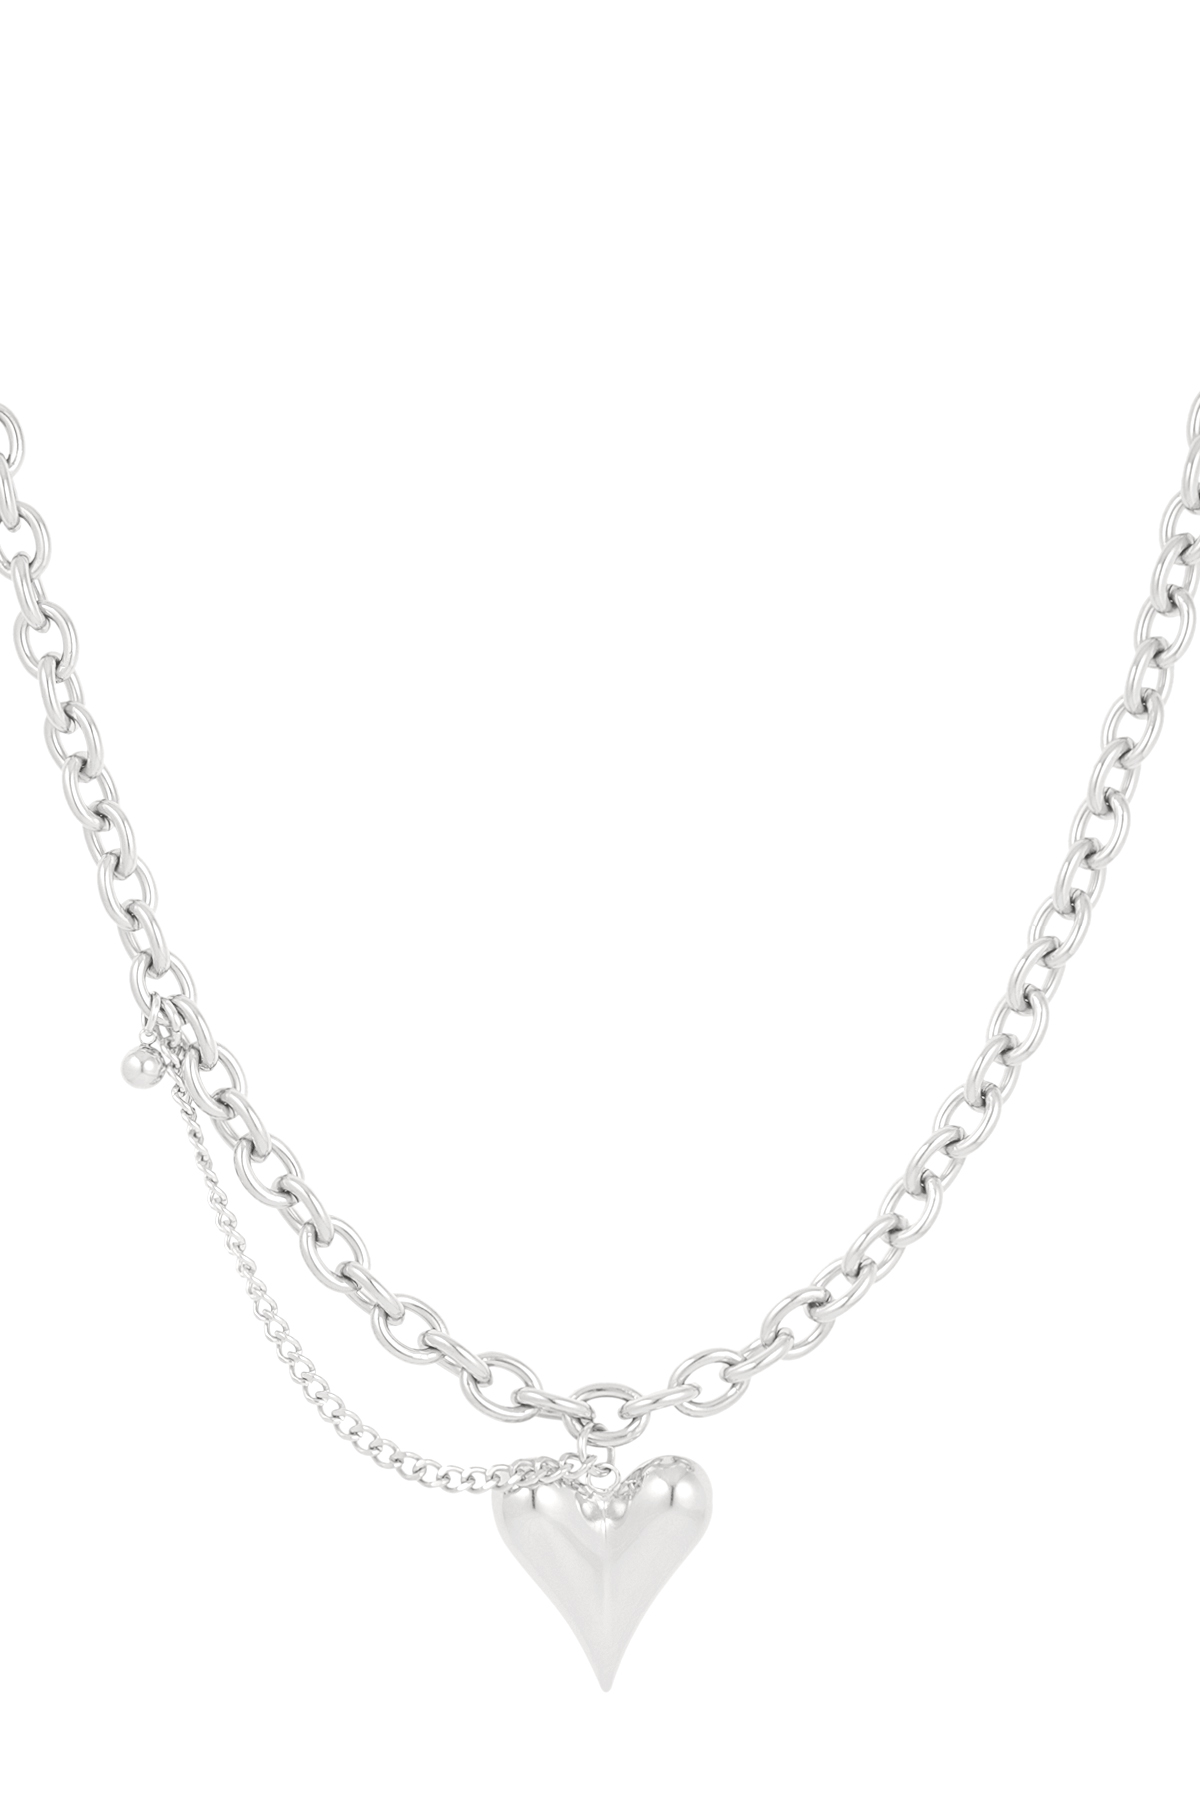 Ketting love life - zilver h5 